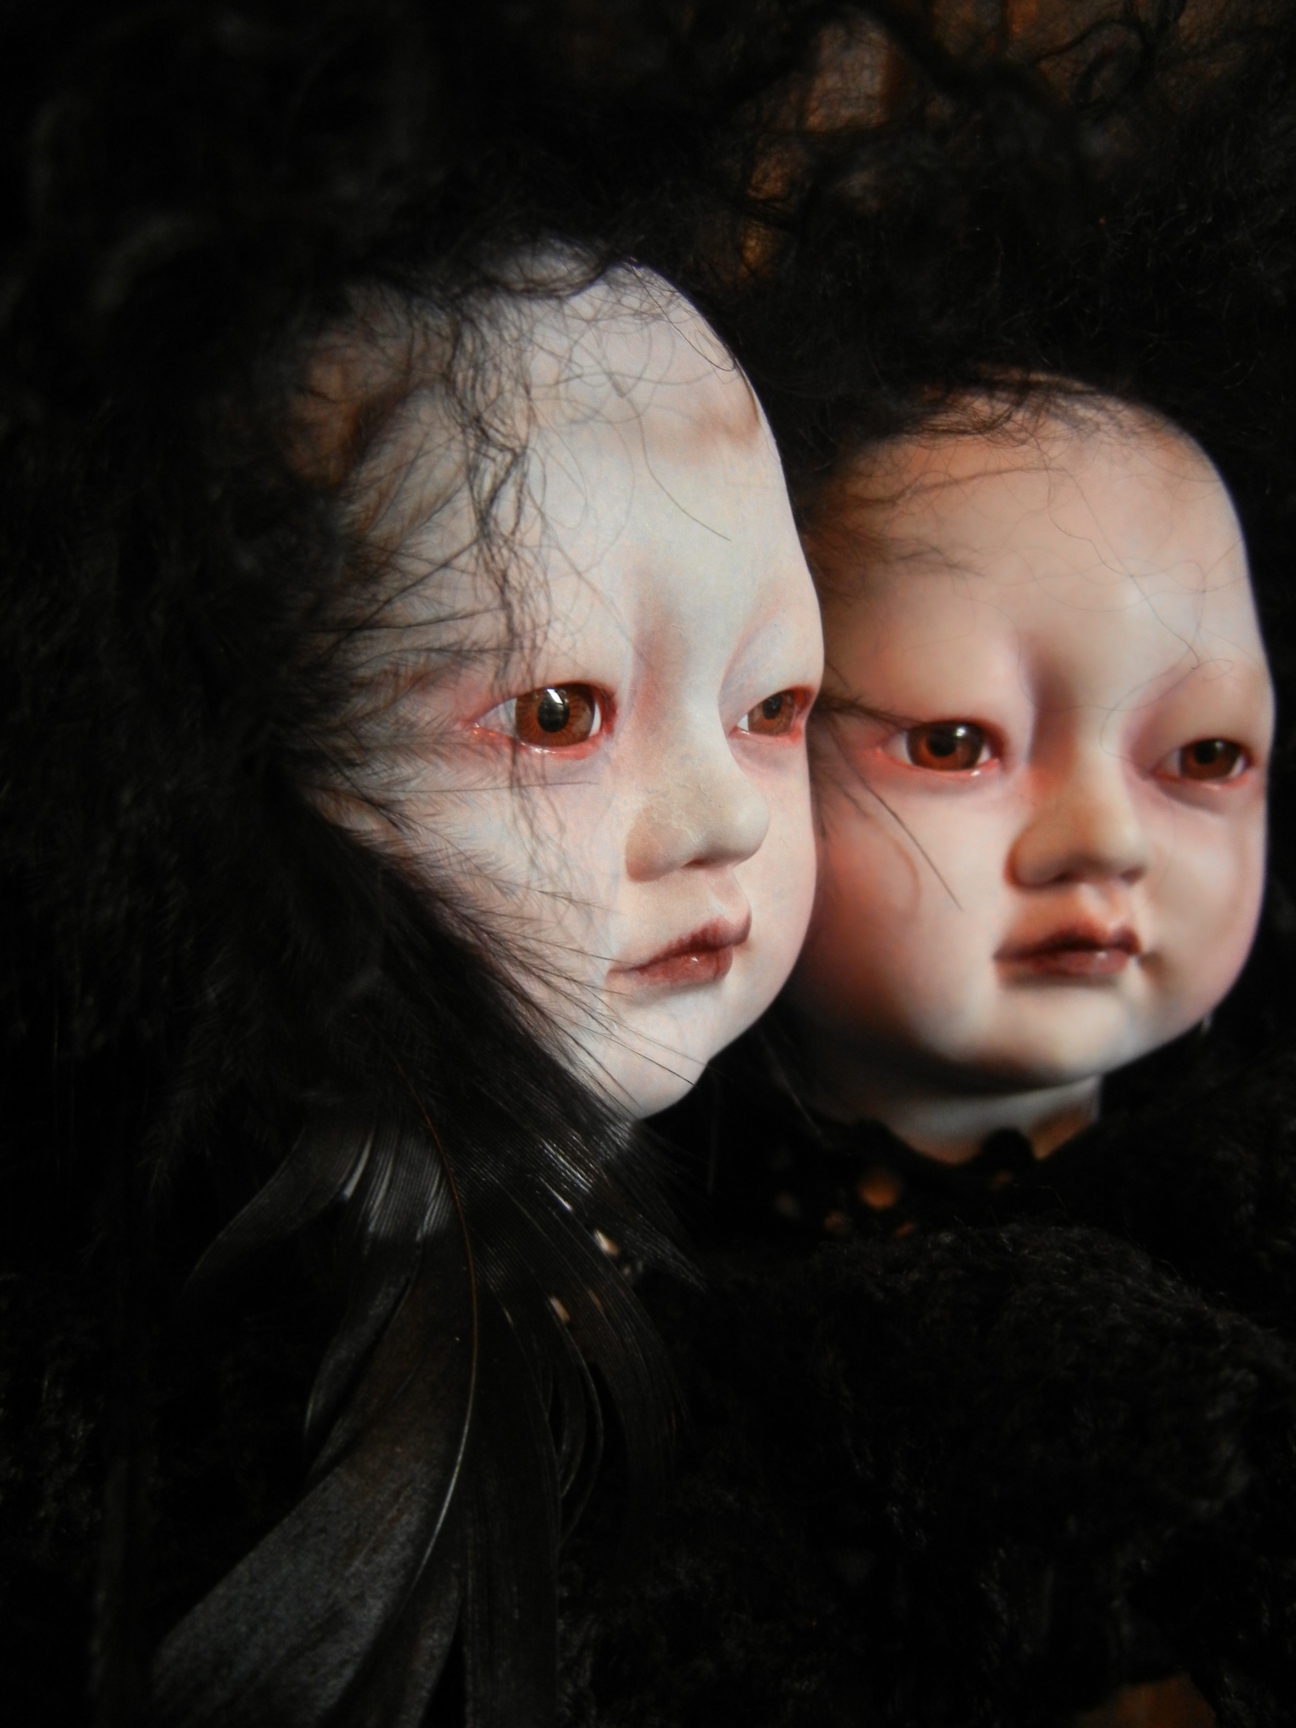 the faces of conjoined twins sisters artdoll, Asian babydoll repaint gothic artdoll faces with black hair and black feathers